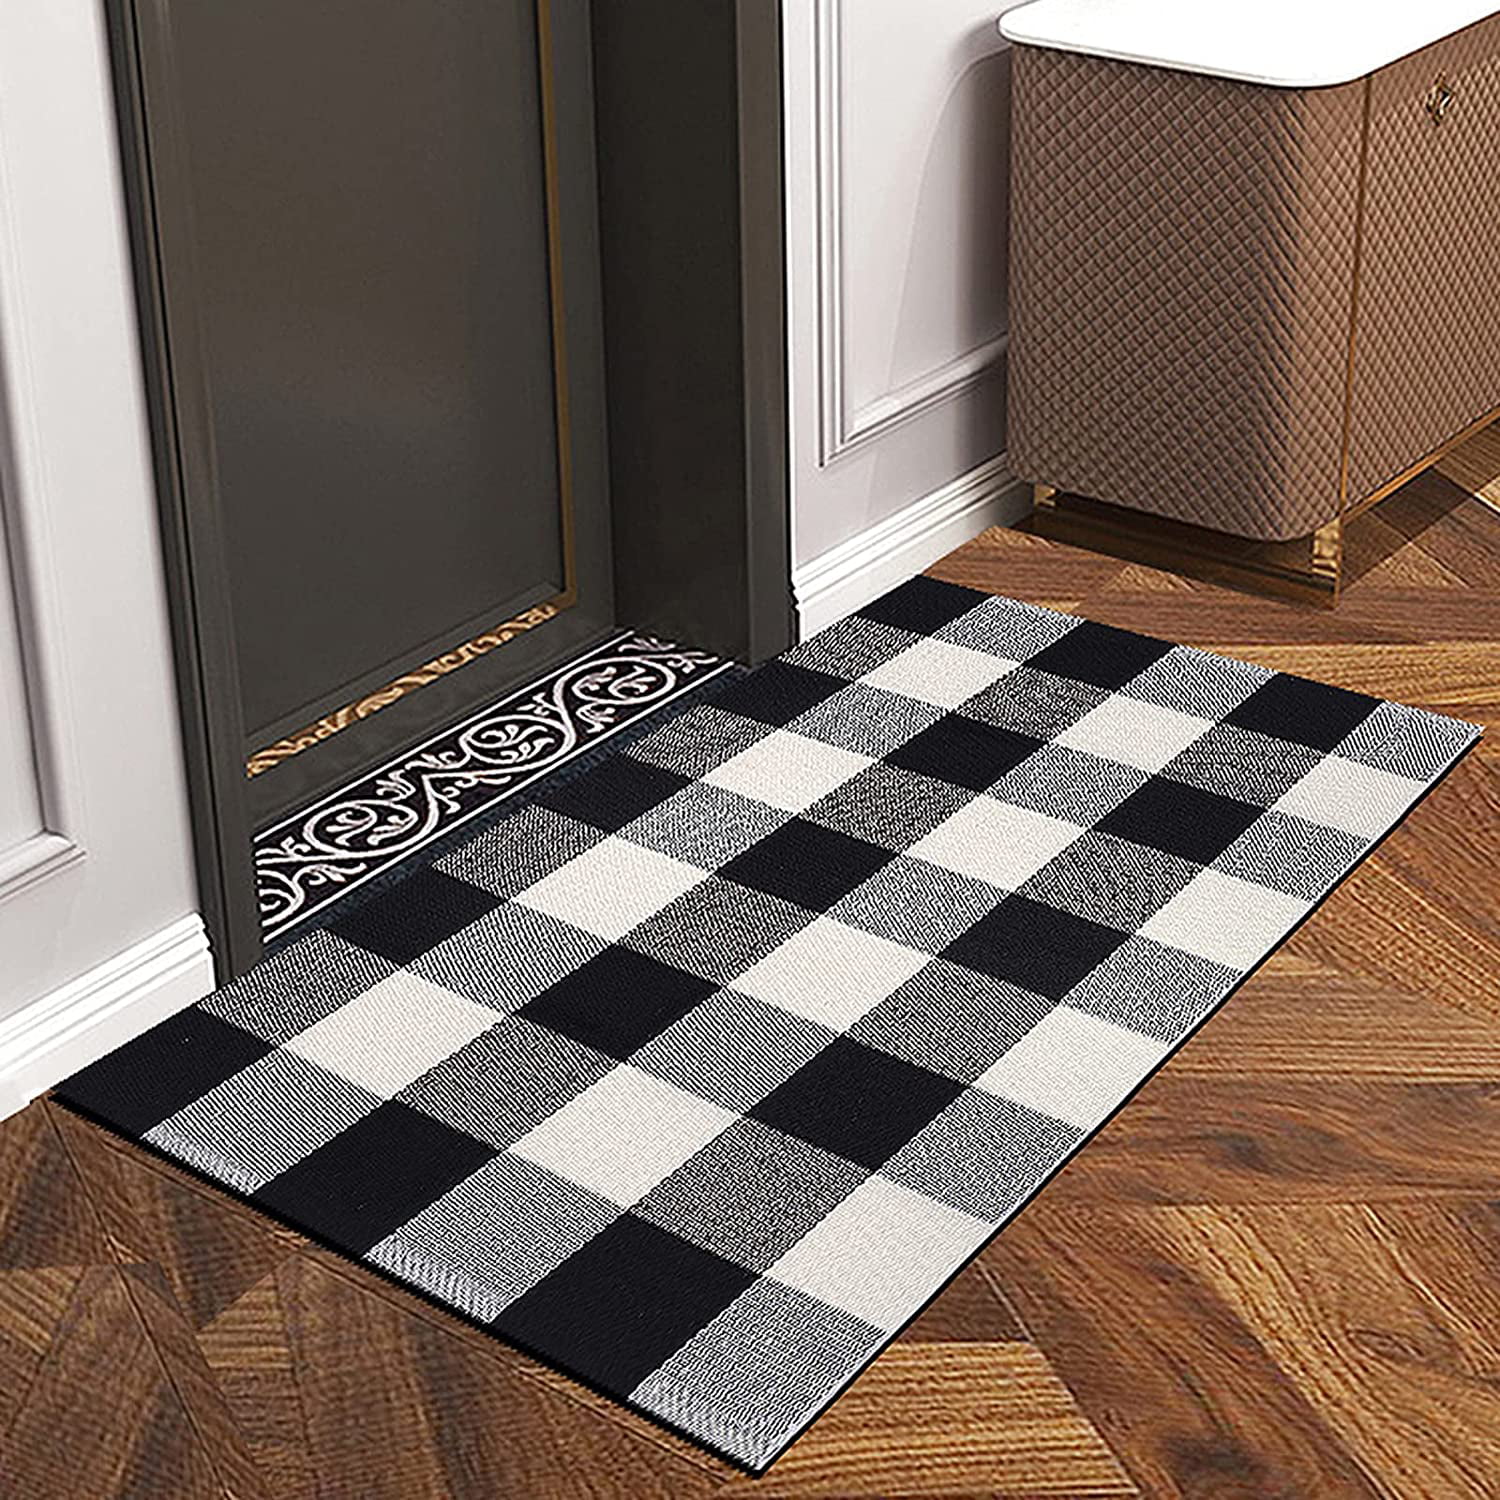 Indoor Outdoor Rug Entryway Welcome Mats with Rubber Backing for Shoe Scraper 